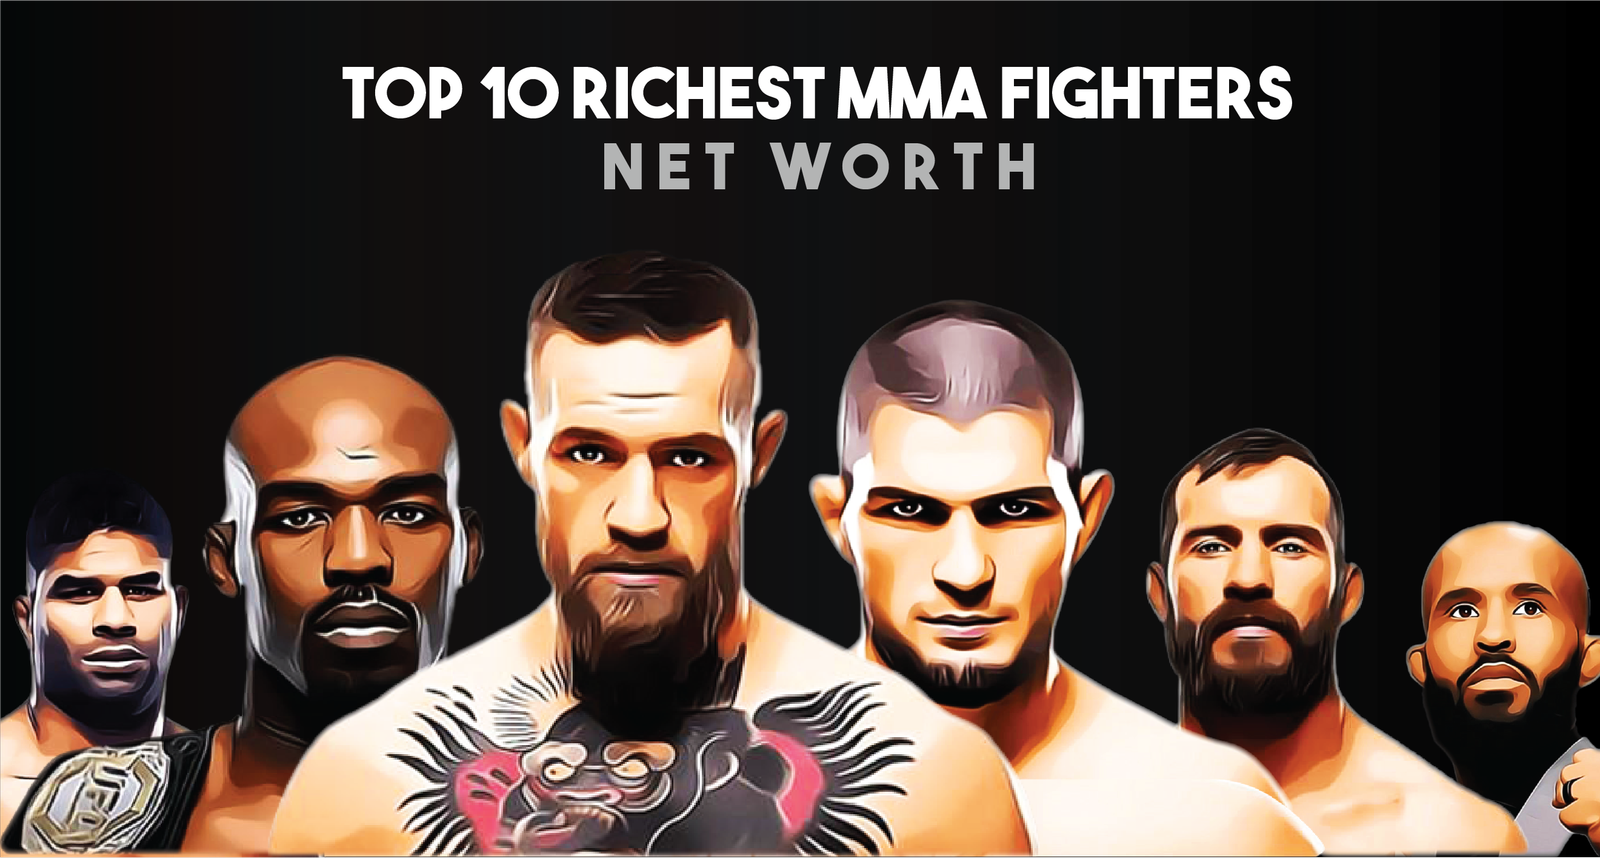 Top 10 Richest MMA Fighters